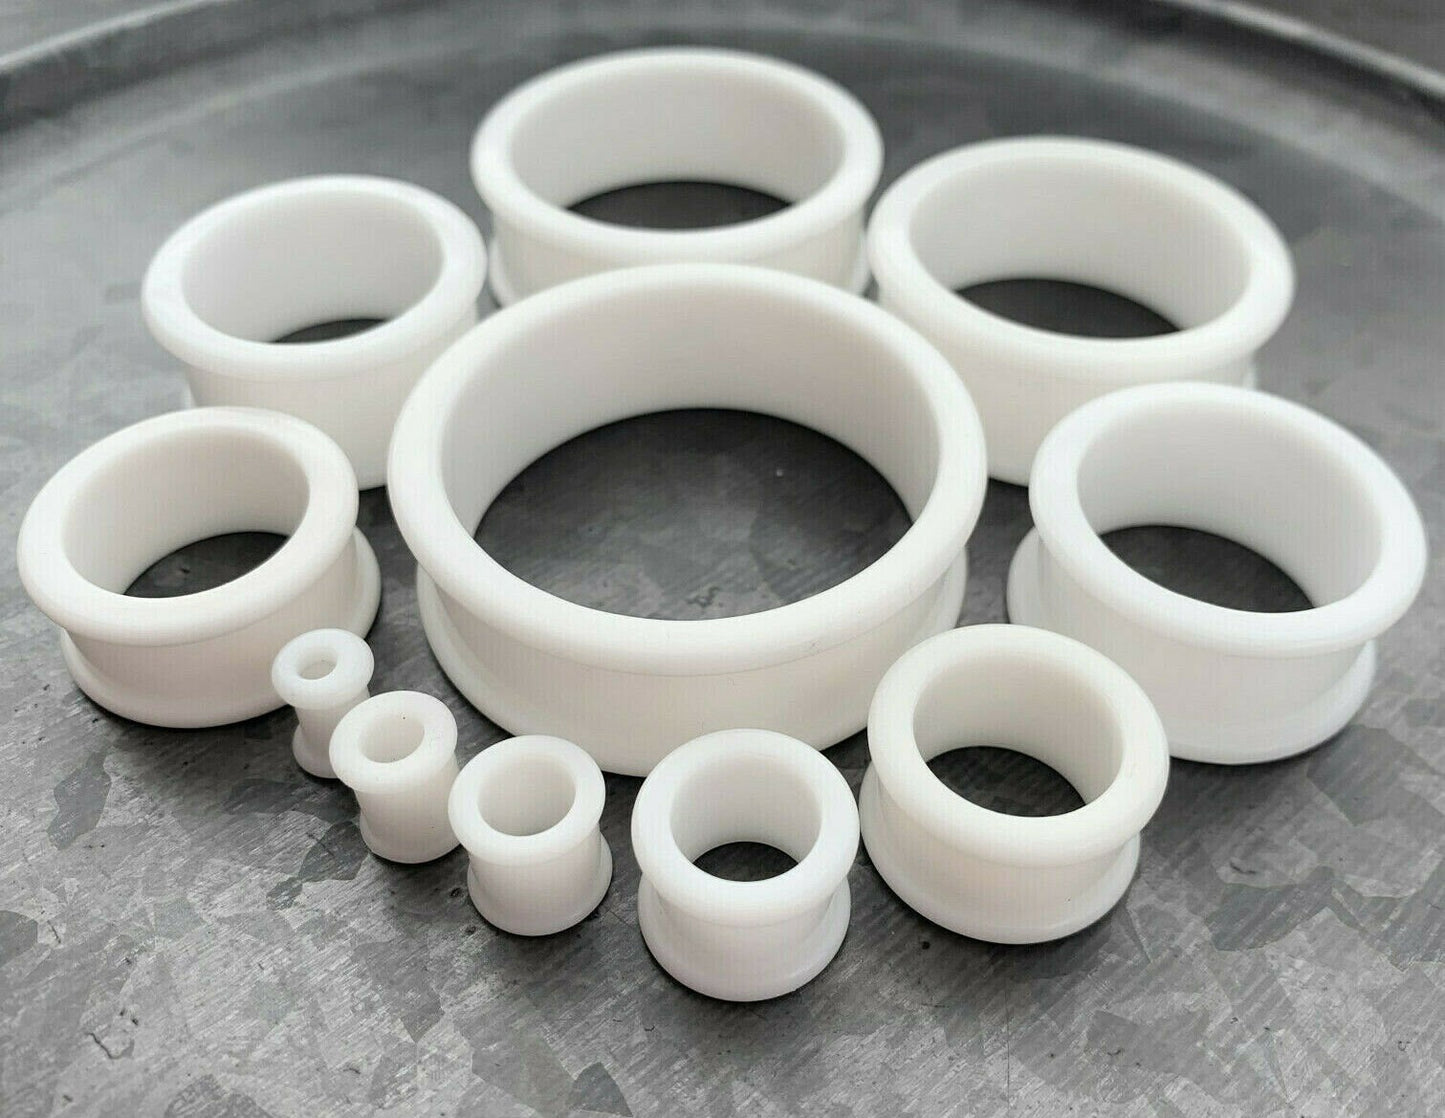 PAIR of Brilliant Bright White Silicone Double Flare Tunnels - Gauges 2g (6mm) up to 2" (51mm) available!